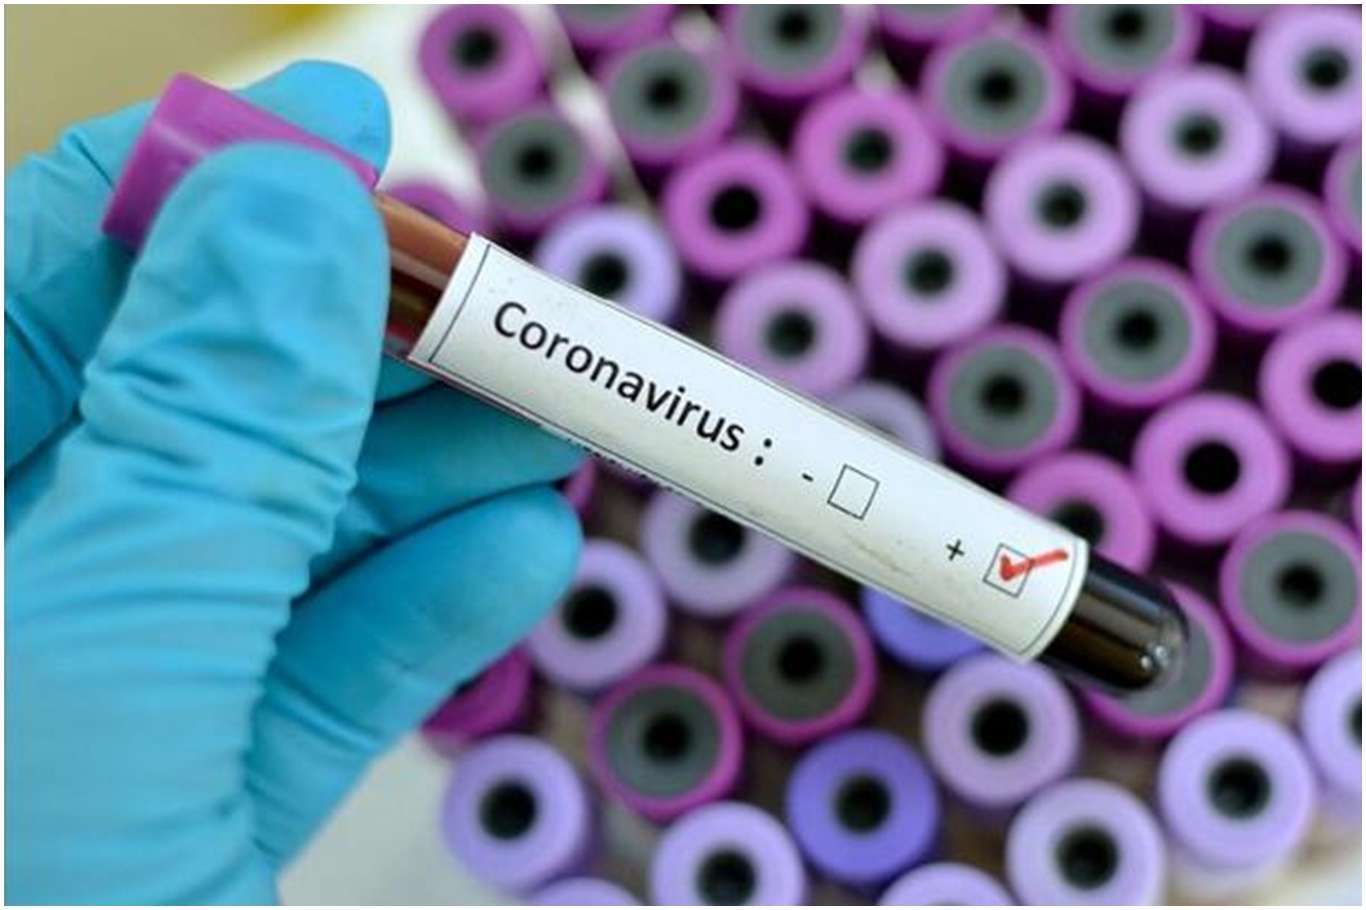 The number of the deaths from coronavirus surpasses 200,000 in the United States